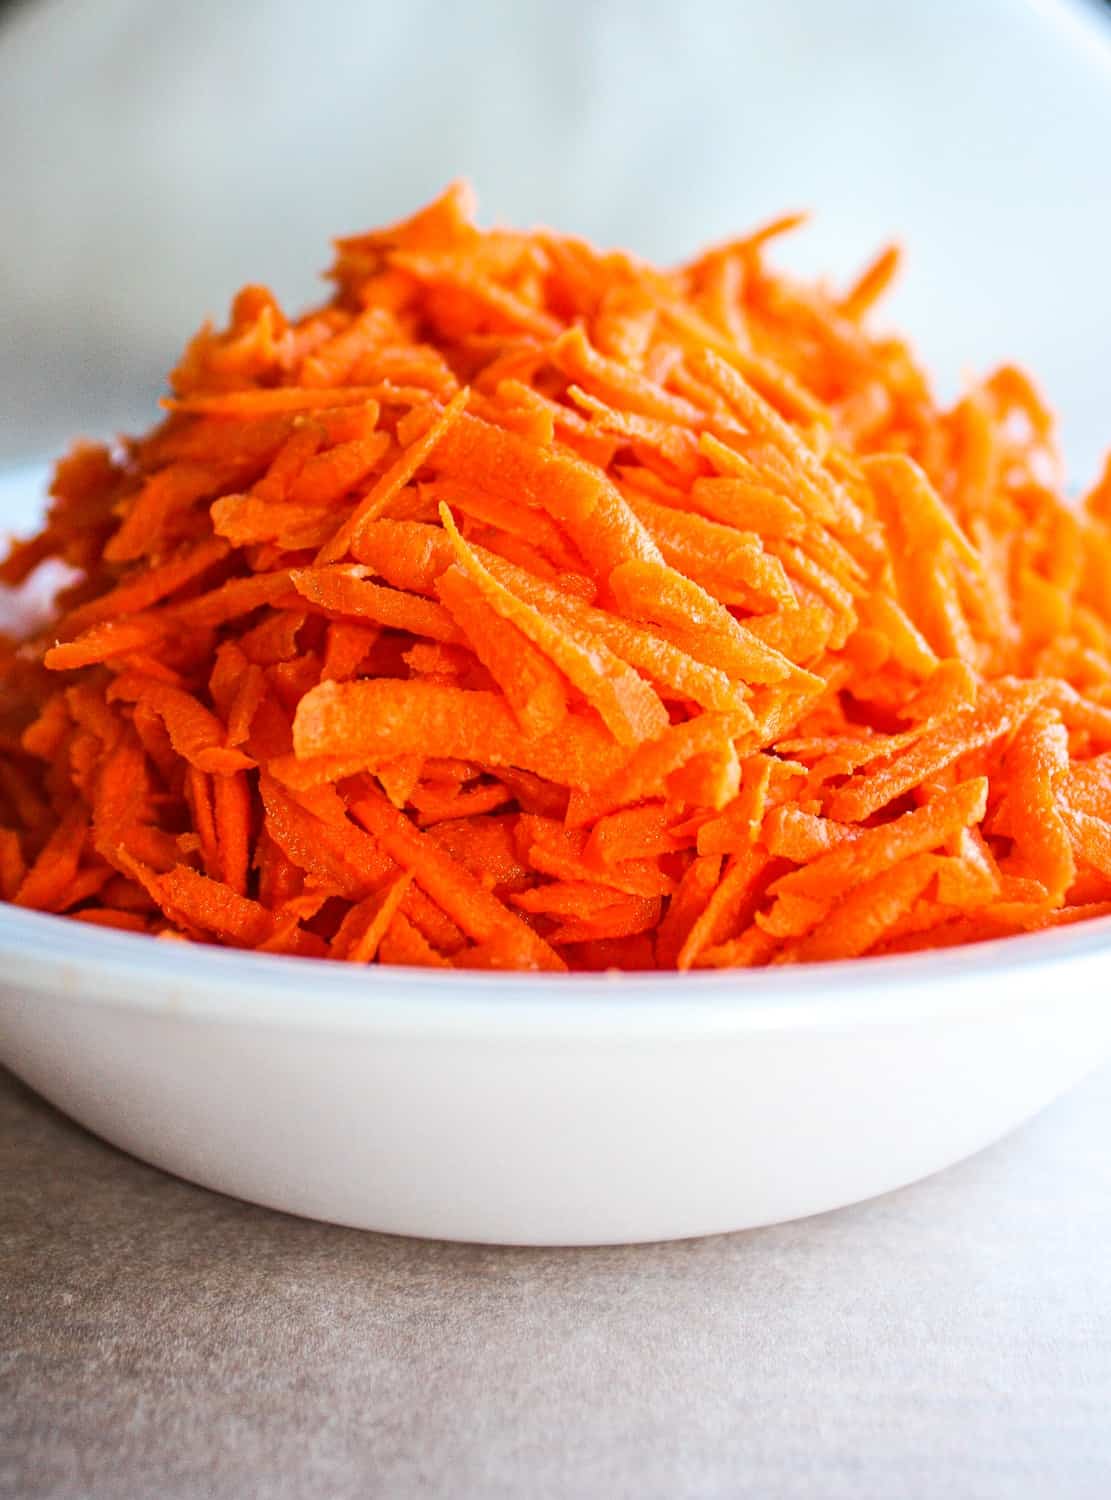 The grated carrots.